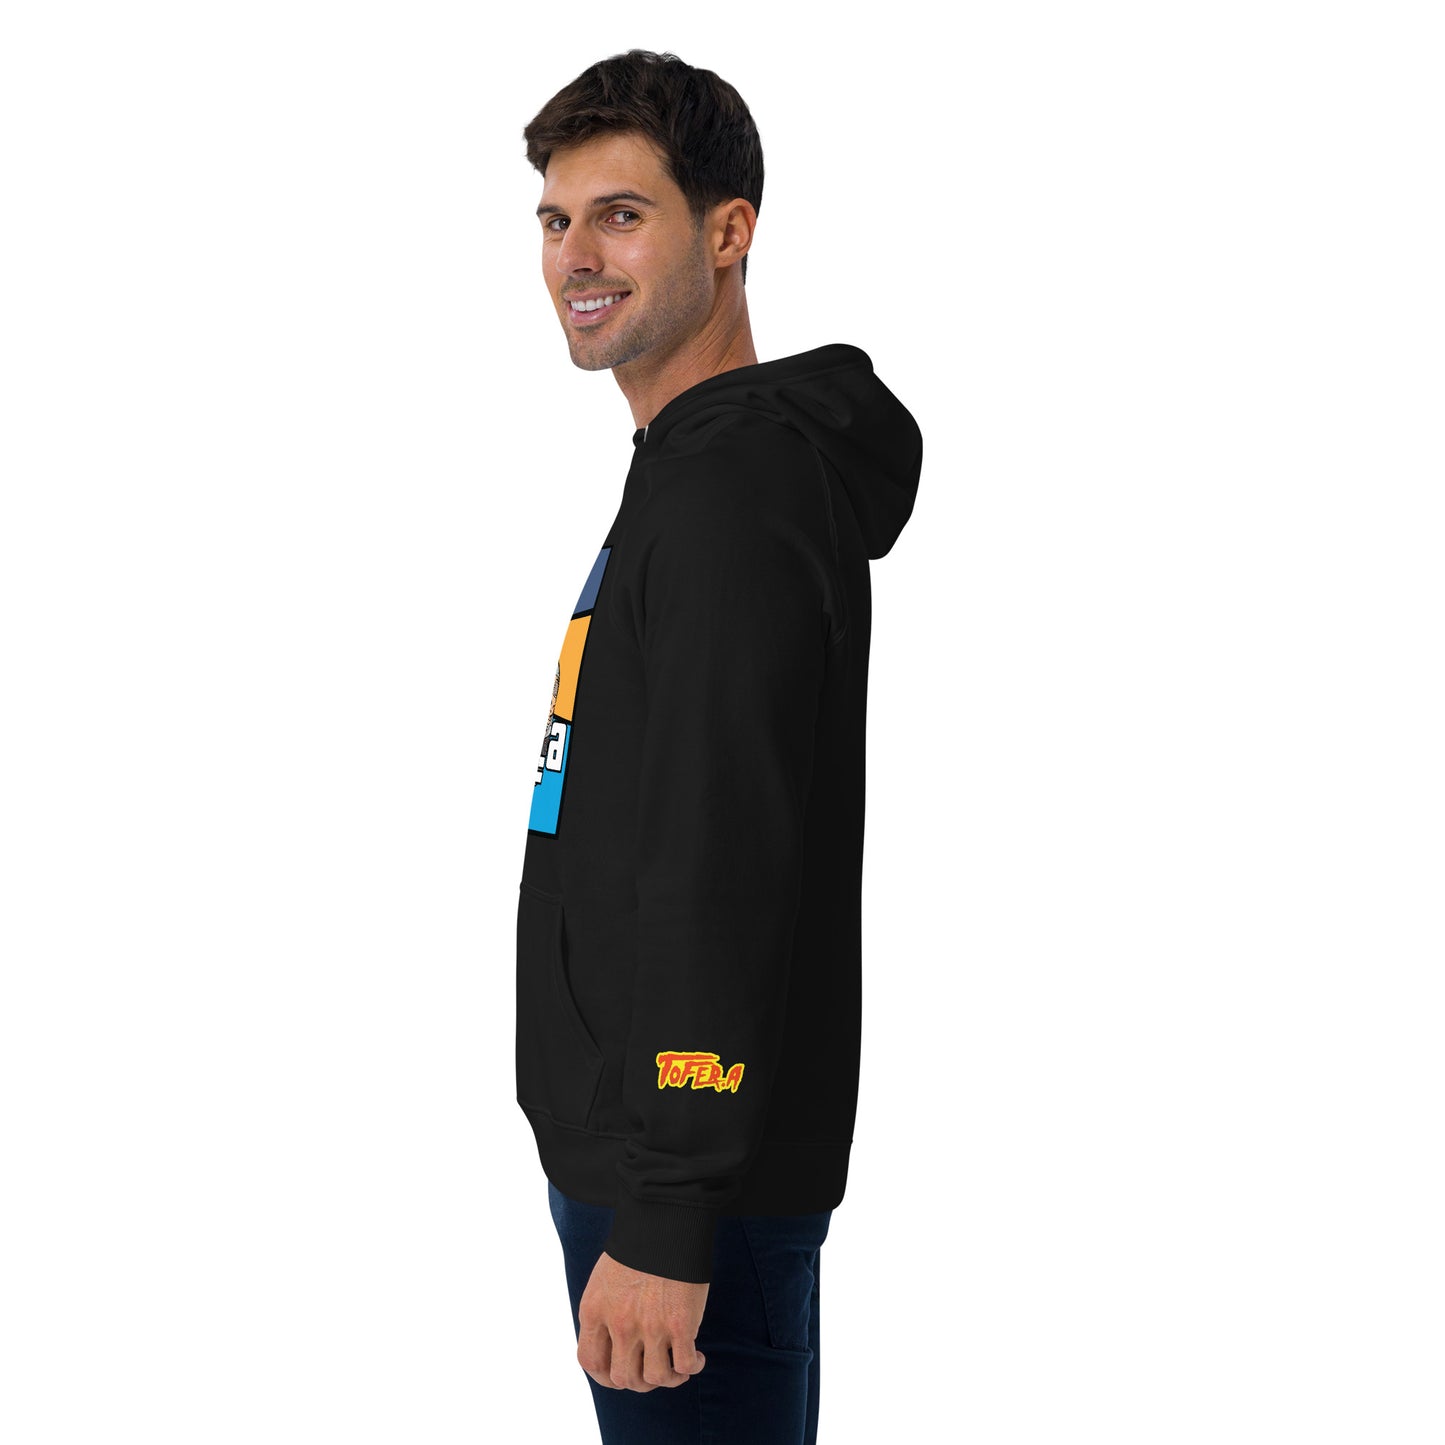 G.Tofer.A Hoodie